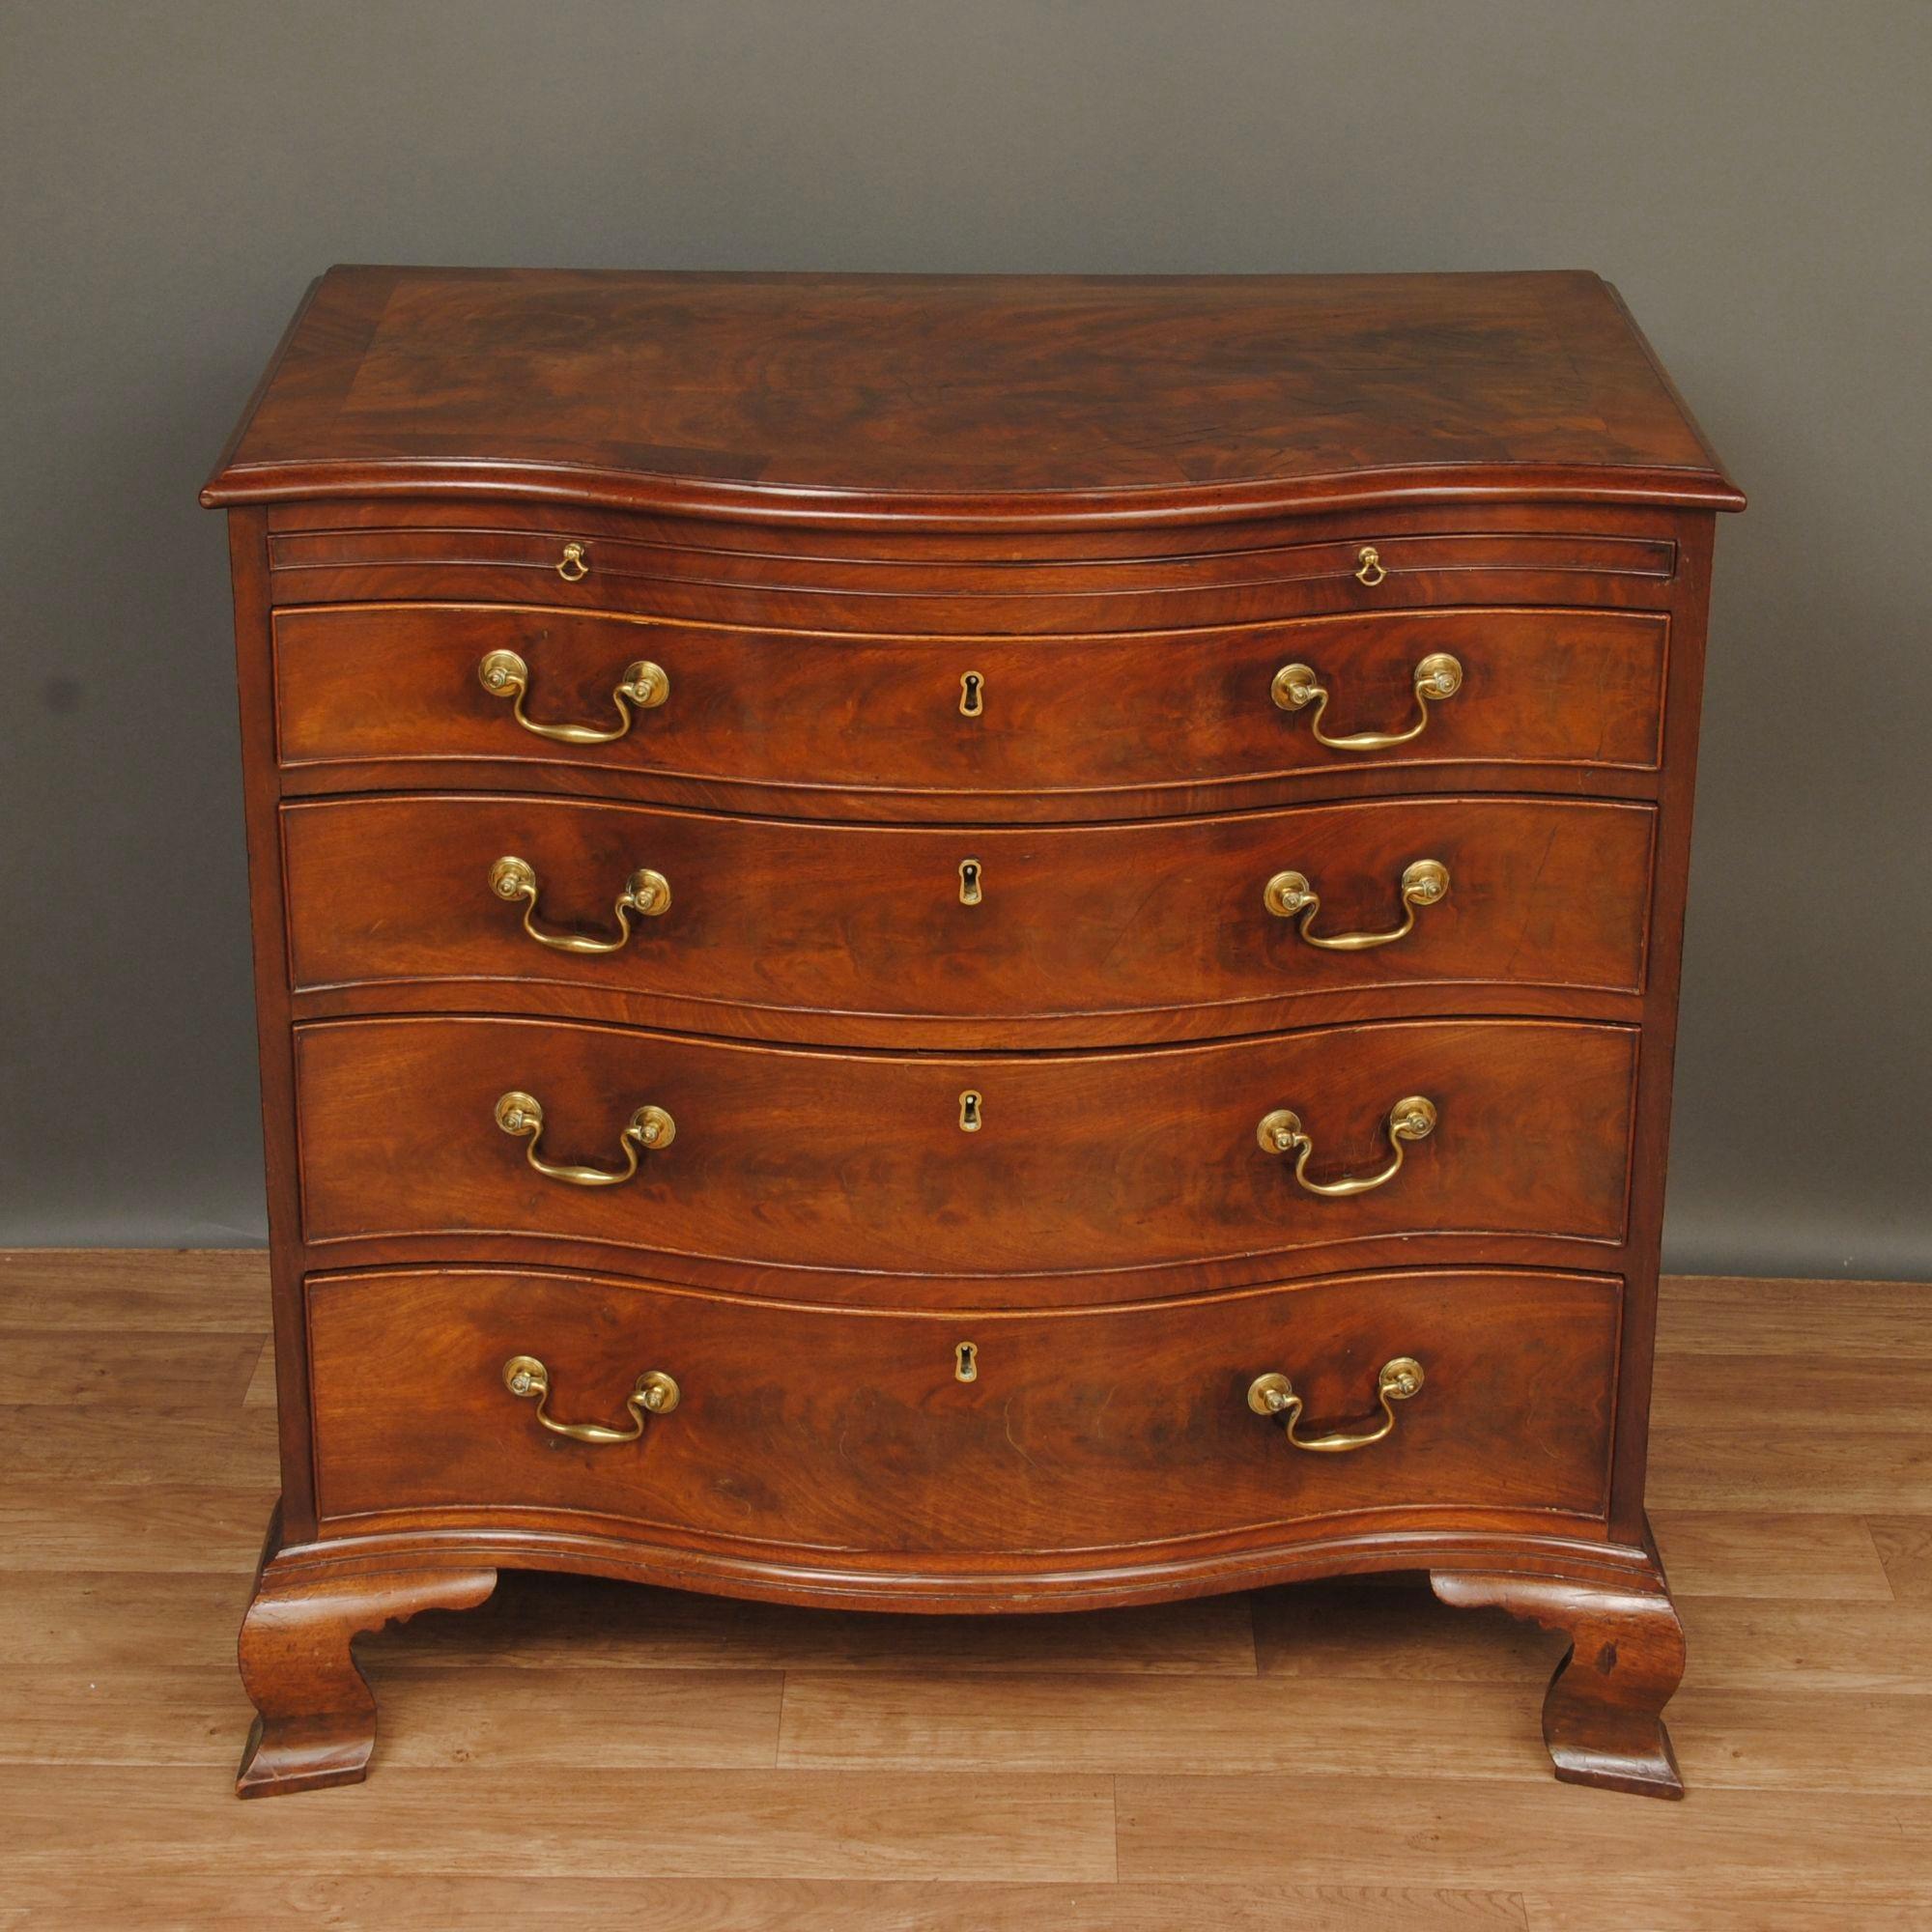 A super example of a flame mahogany serpentine chest with original swanneck handles and ogee bracket feet. The top with a large cross banding and lovely grain to the timber.
The whole piece with fine colour and superb patination.

From a fine